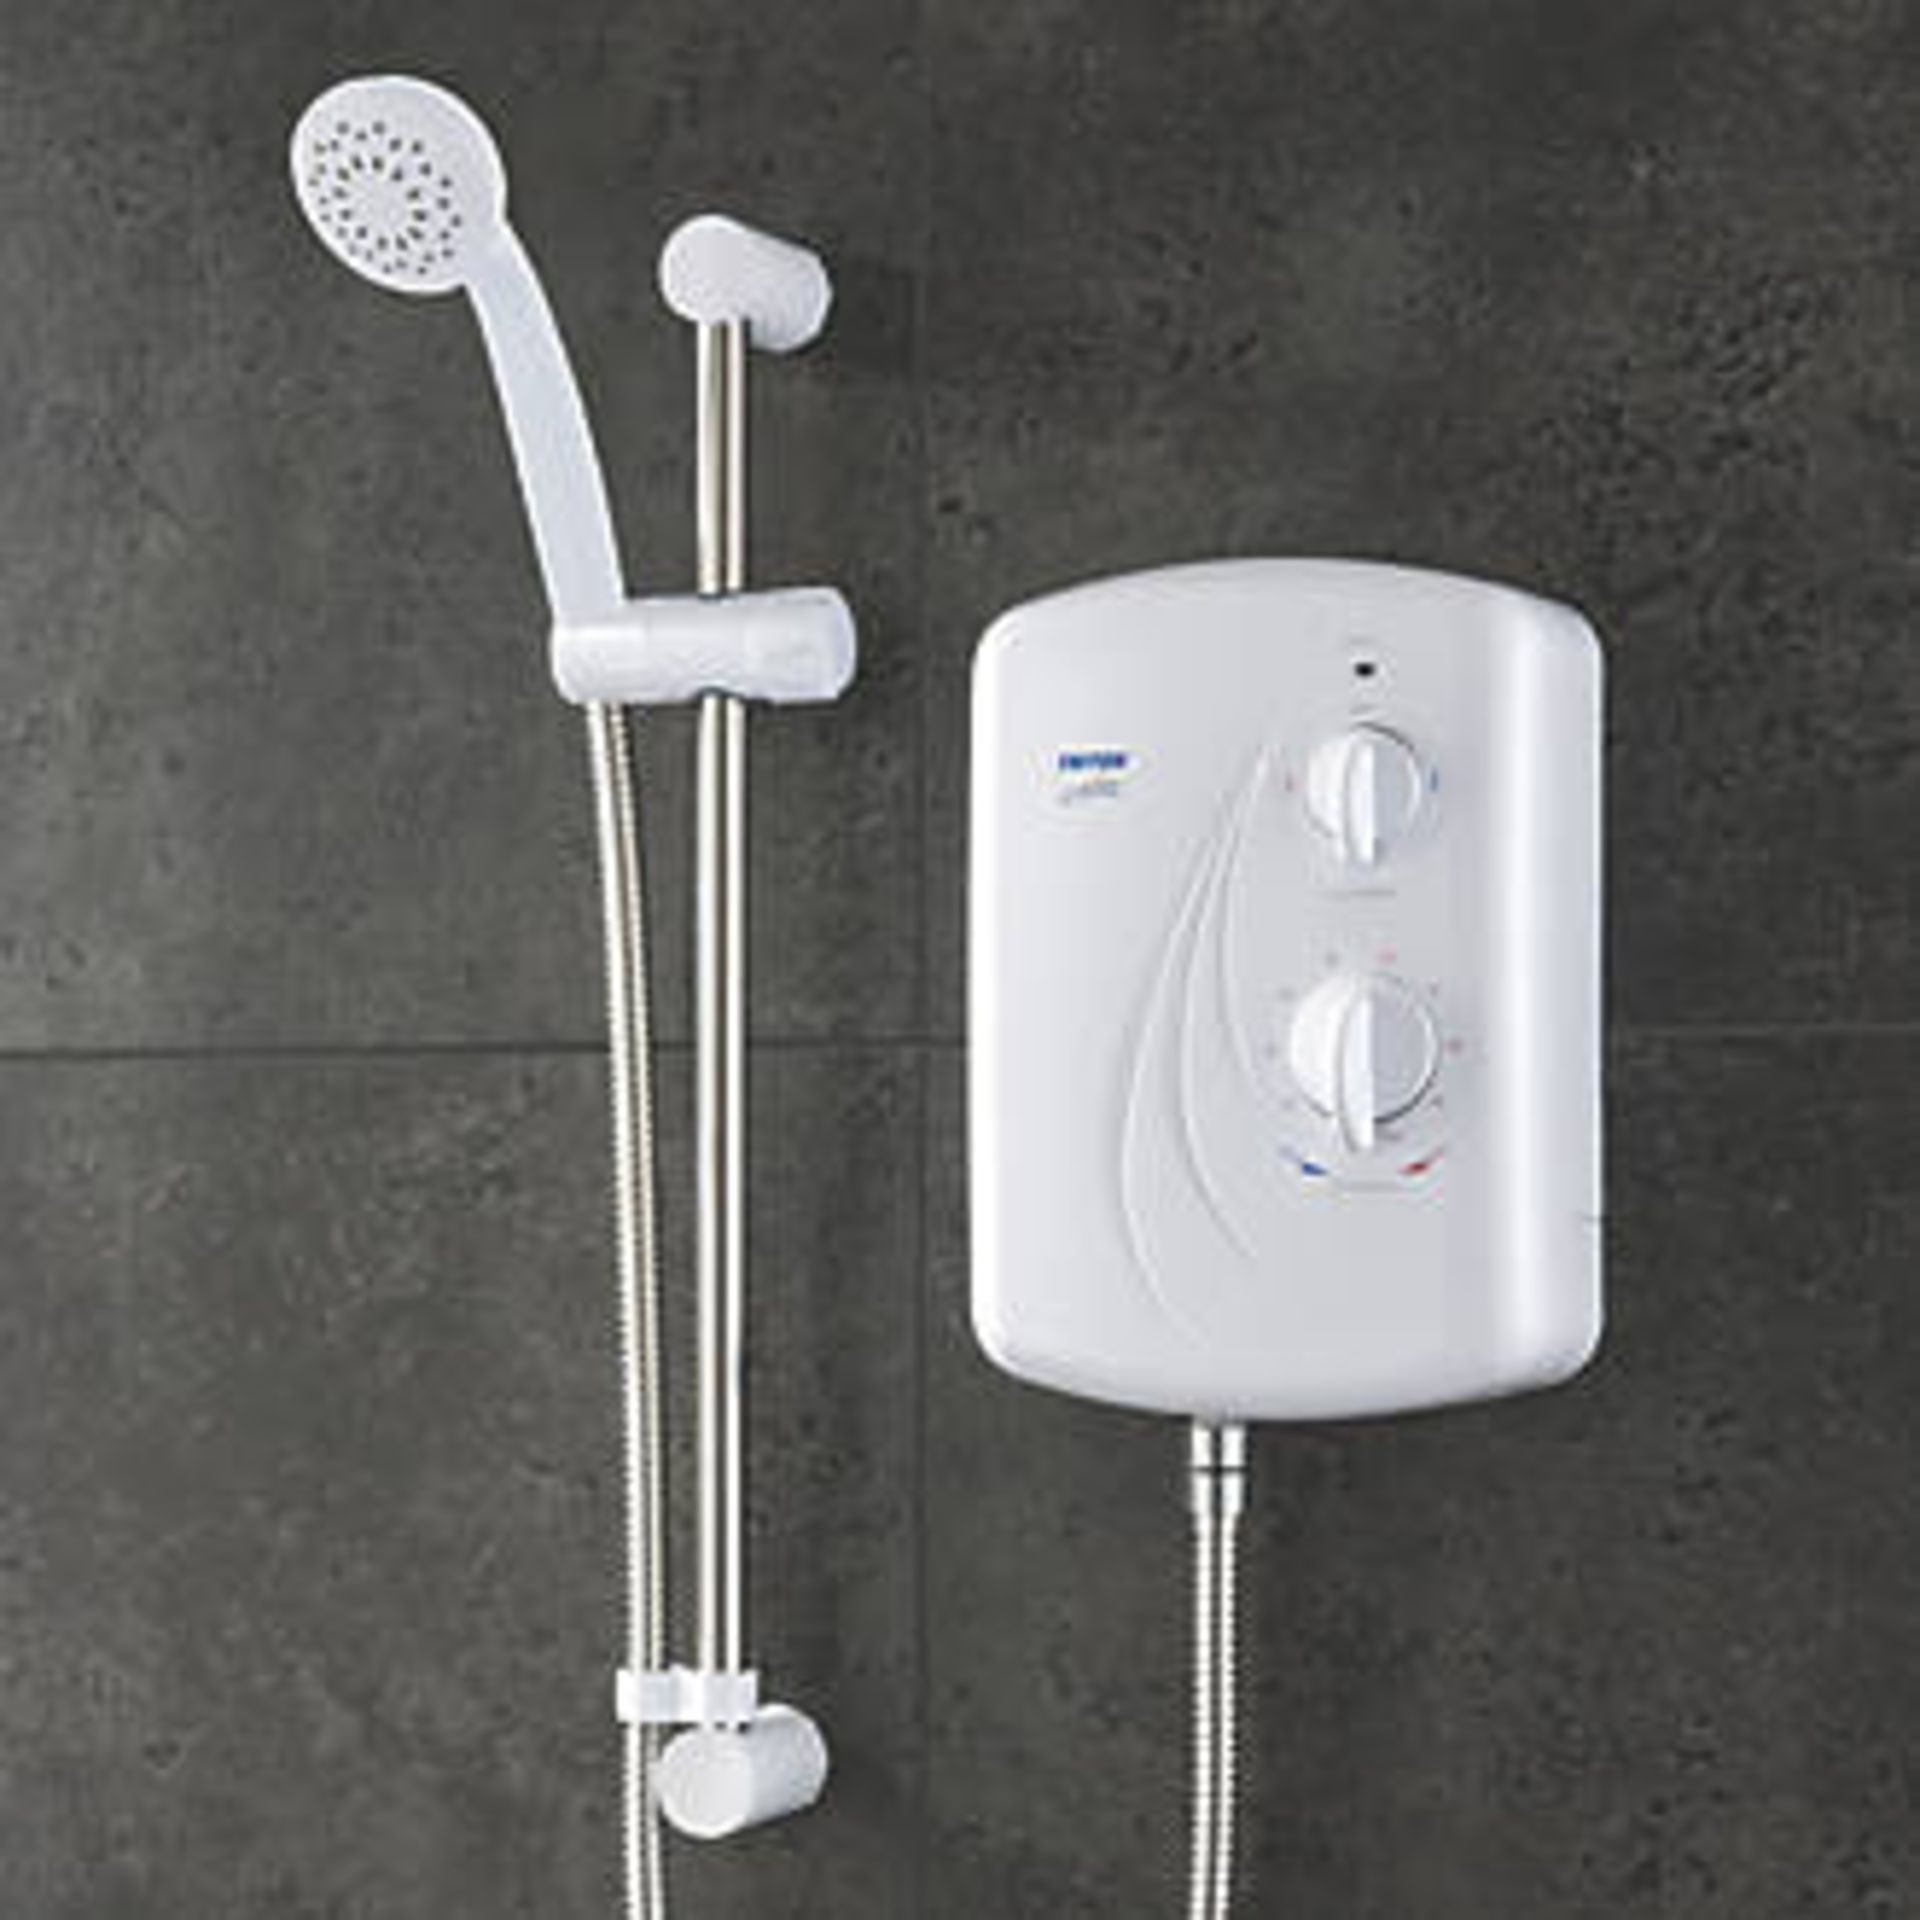 (XL78) Triton Enrich White 8.5kW Manual Electric Shower. A great value unit that is easy to use...(